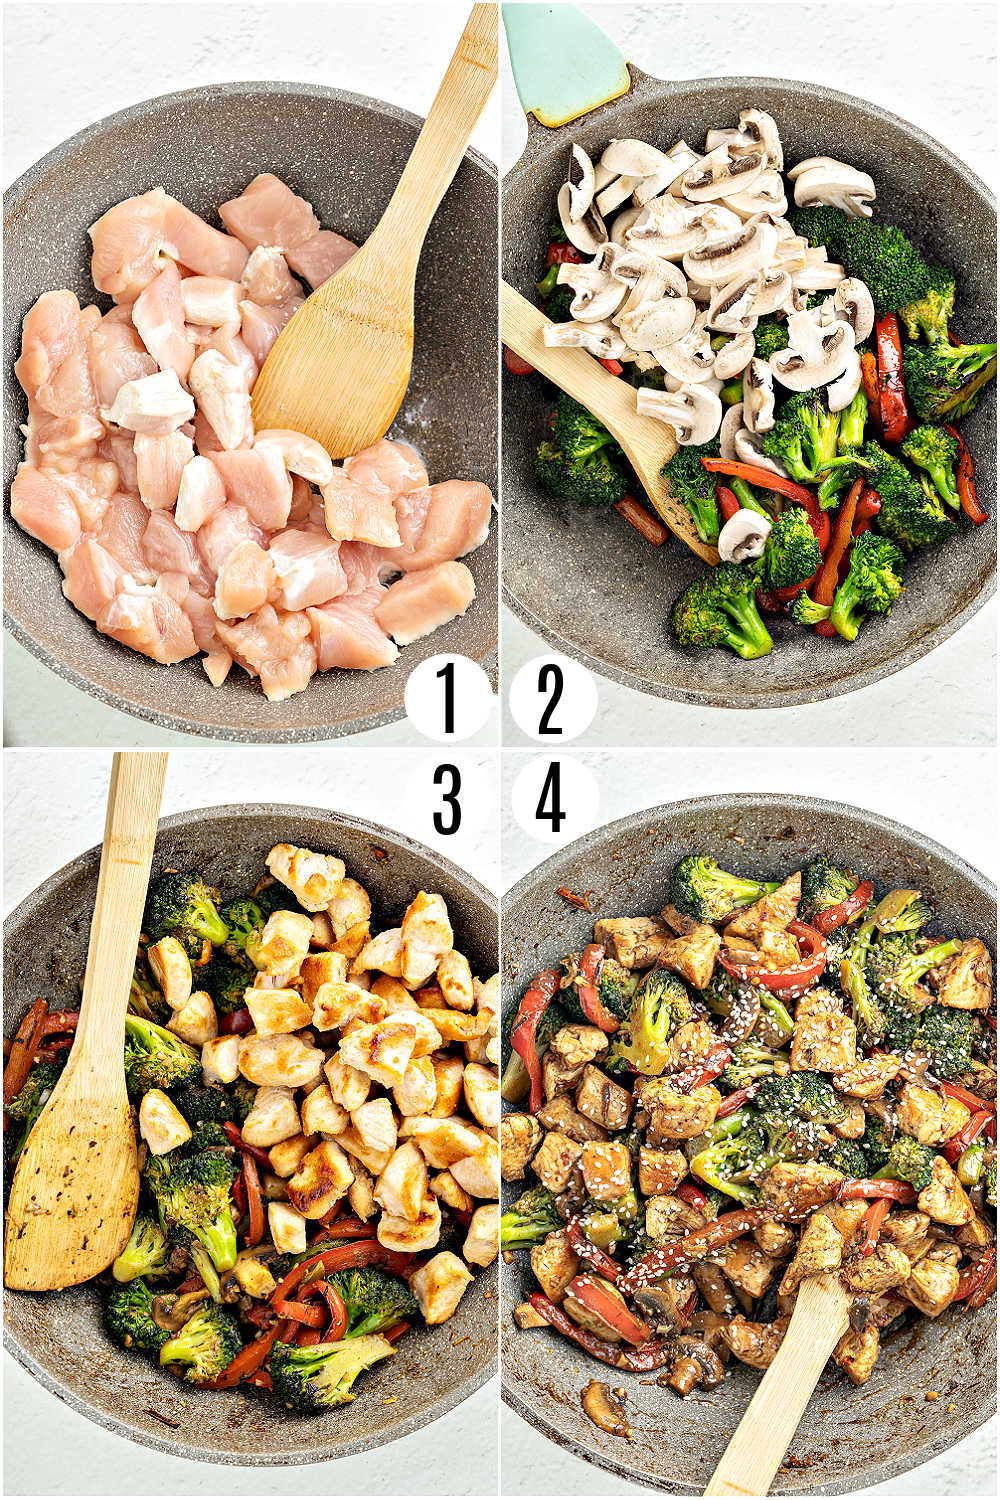 Step by step photos showing how to make chicken stir fry.